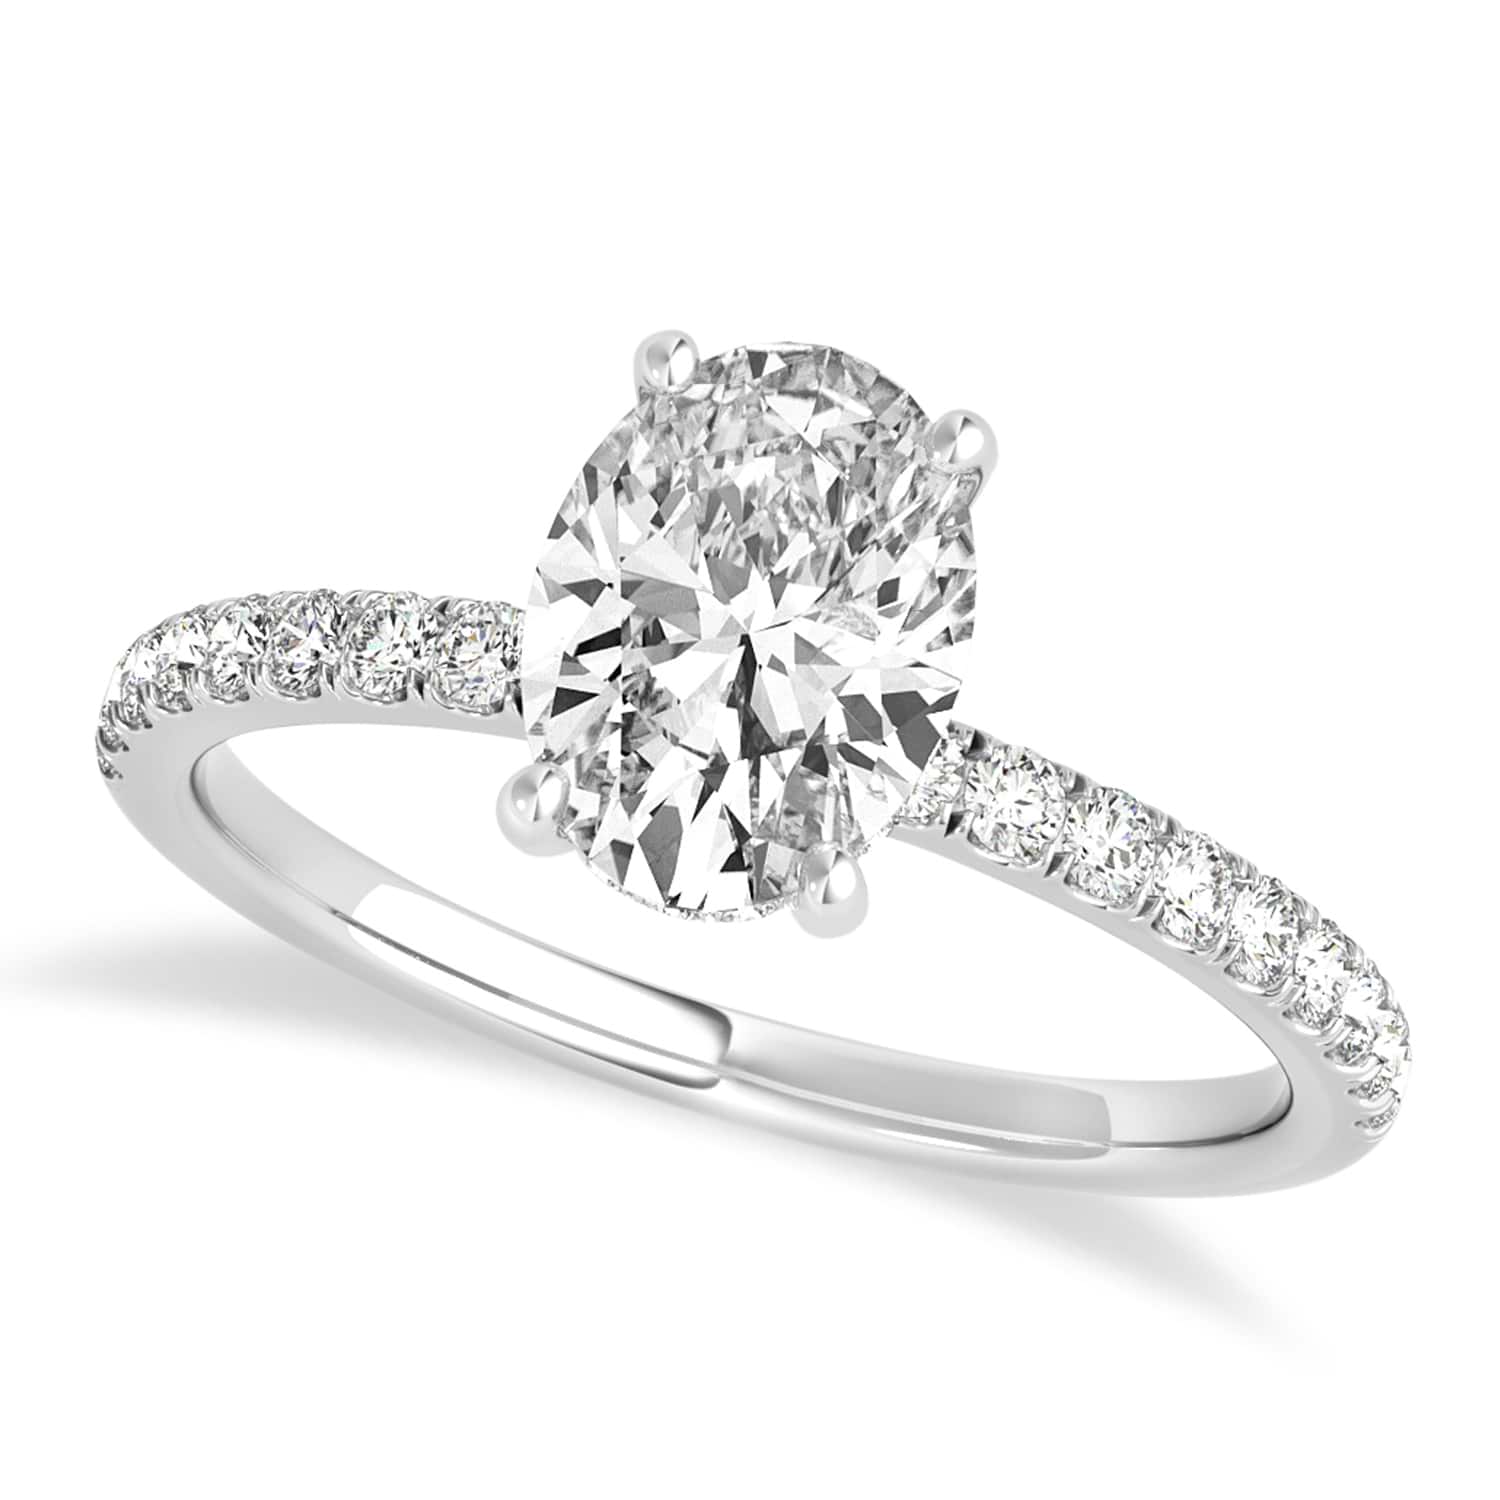 Oval Lab Grown Diamond Single Row Hidden Halo Engagement Ring 18k White Gold (2.50ct)